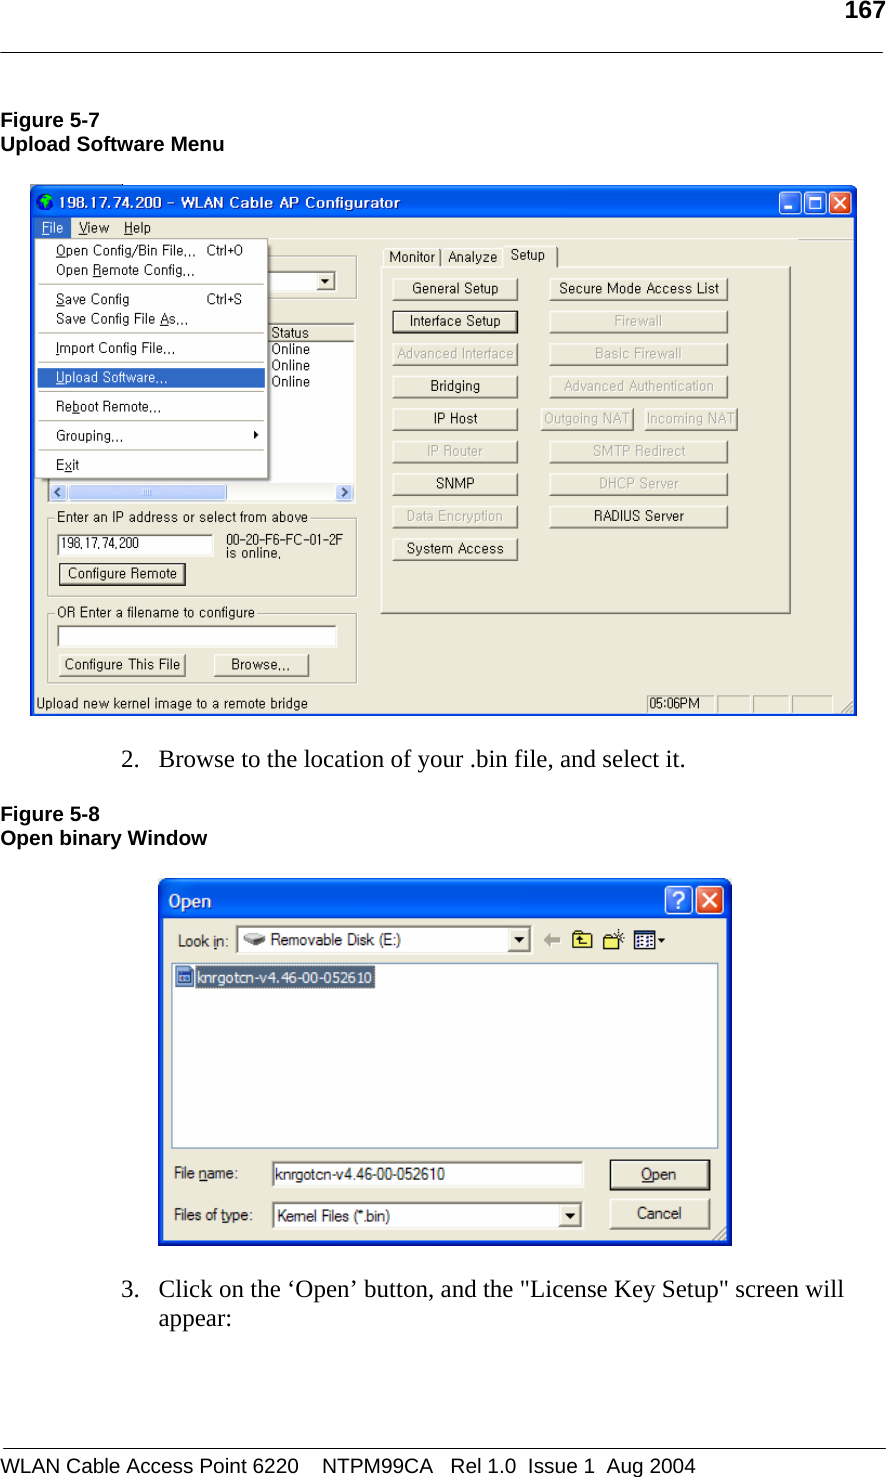   167  Figure 5-7 Upload Software Menu    2. Browse to the location of your .bin file, and select it.  Figure 5-8 Open binary Window   3. Click on the ‘Open’ button, and the &quot;License Key Setup&quot; screen will appear:  WLAN Cable Access Point 6220    NTPM99CA   Rel 1.0  Issue 1  Aug 2004 